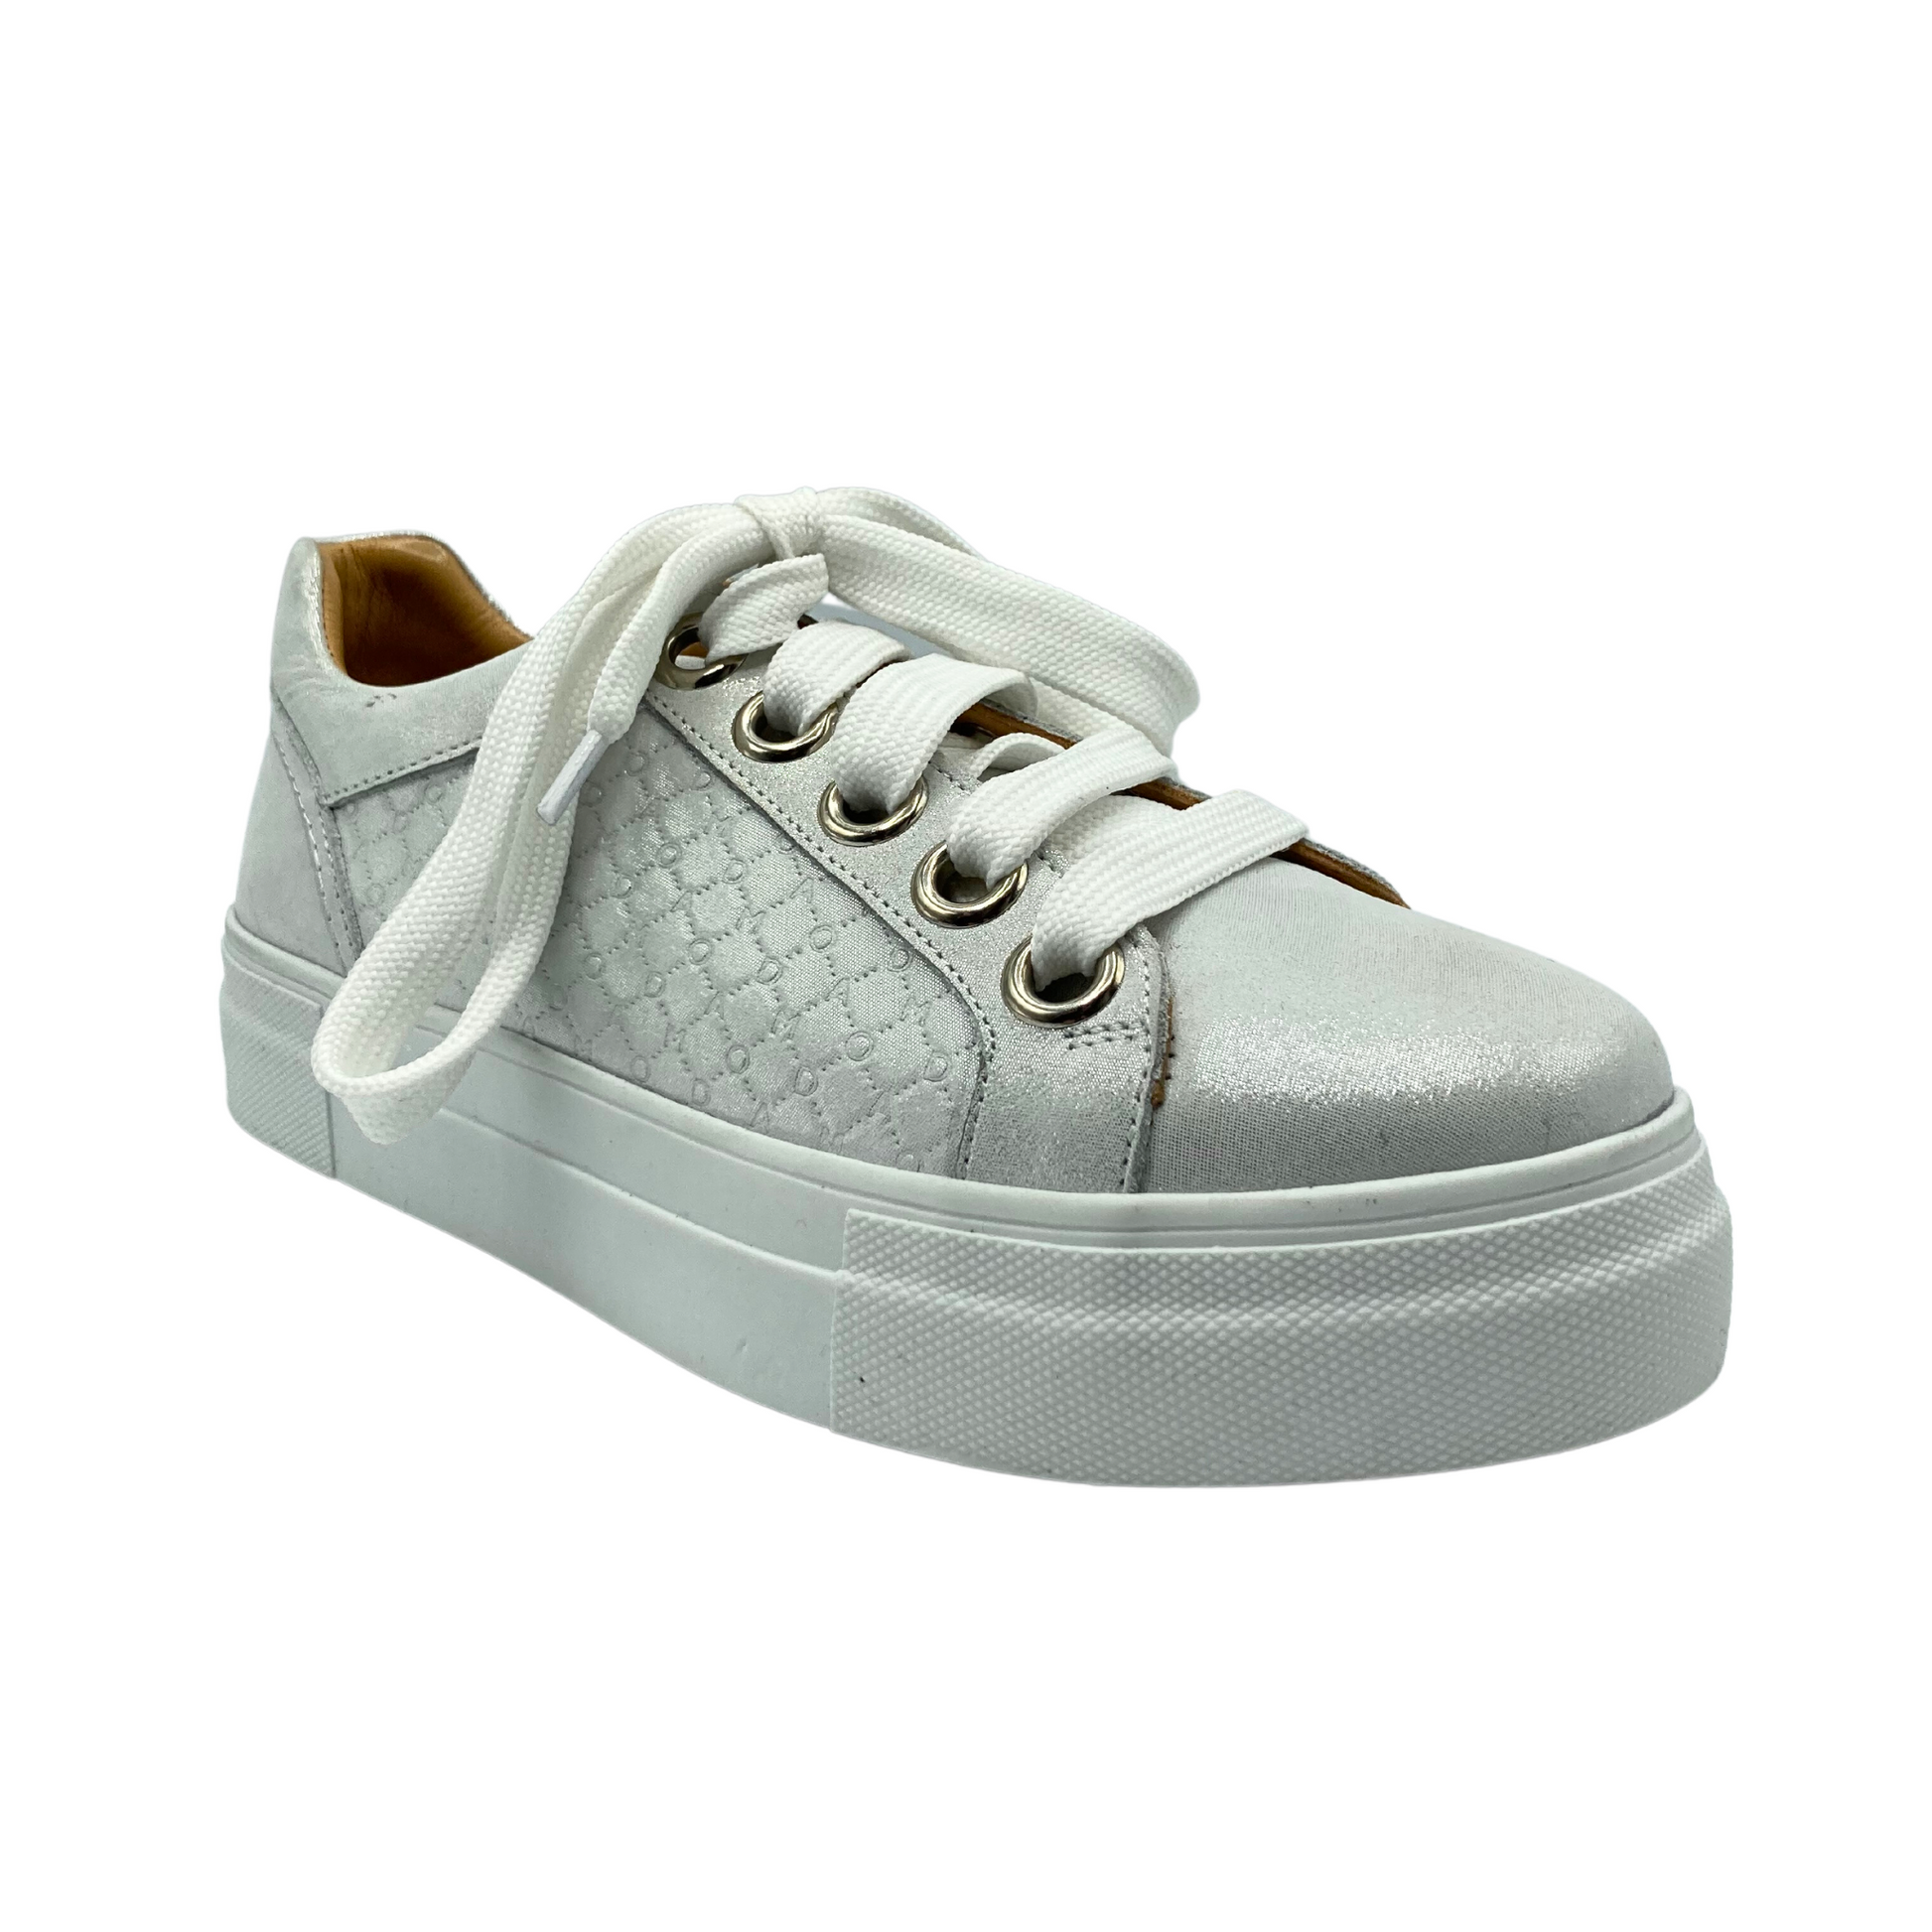 Angled front view of a snazzy sneaker in a glitter grey leather with white laces